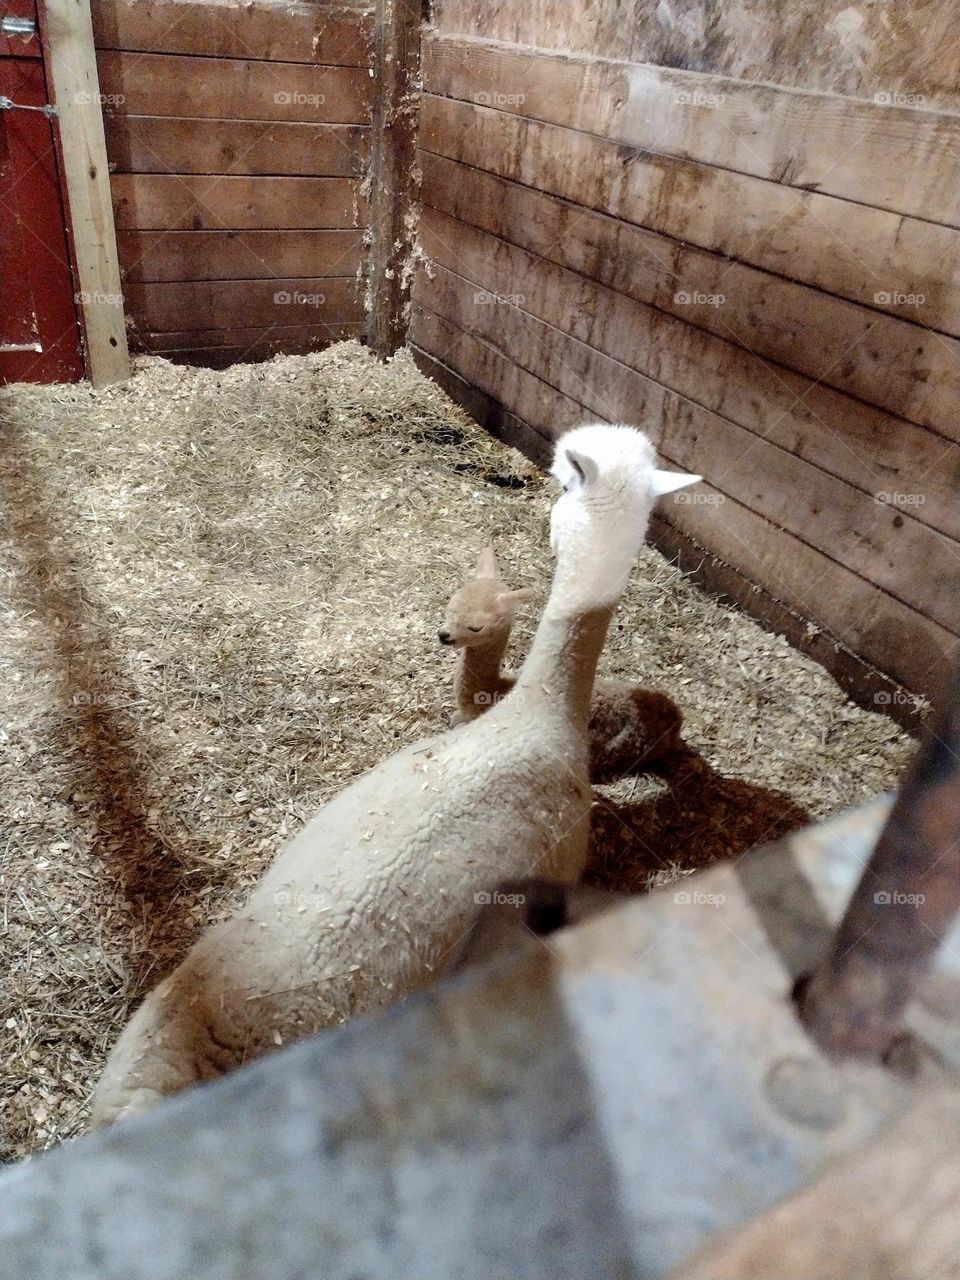 Unfiltered mother and baby llamas on a farm inside a barn